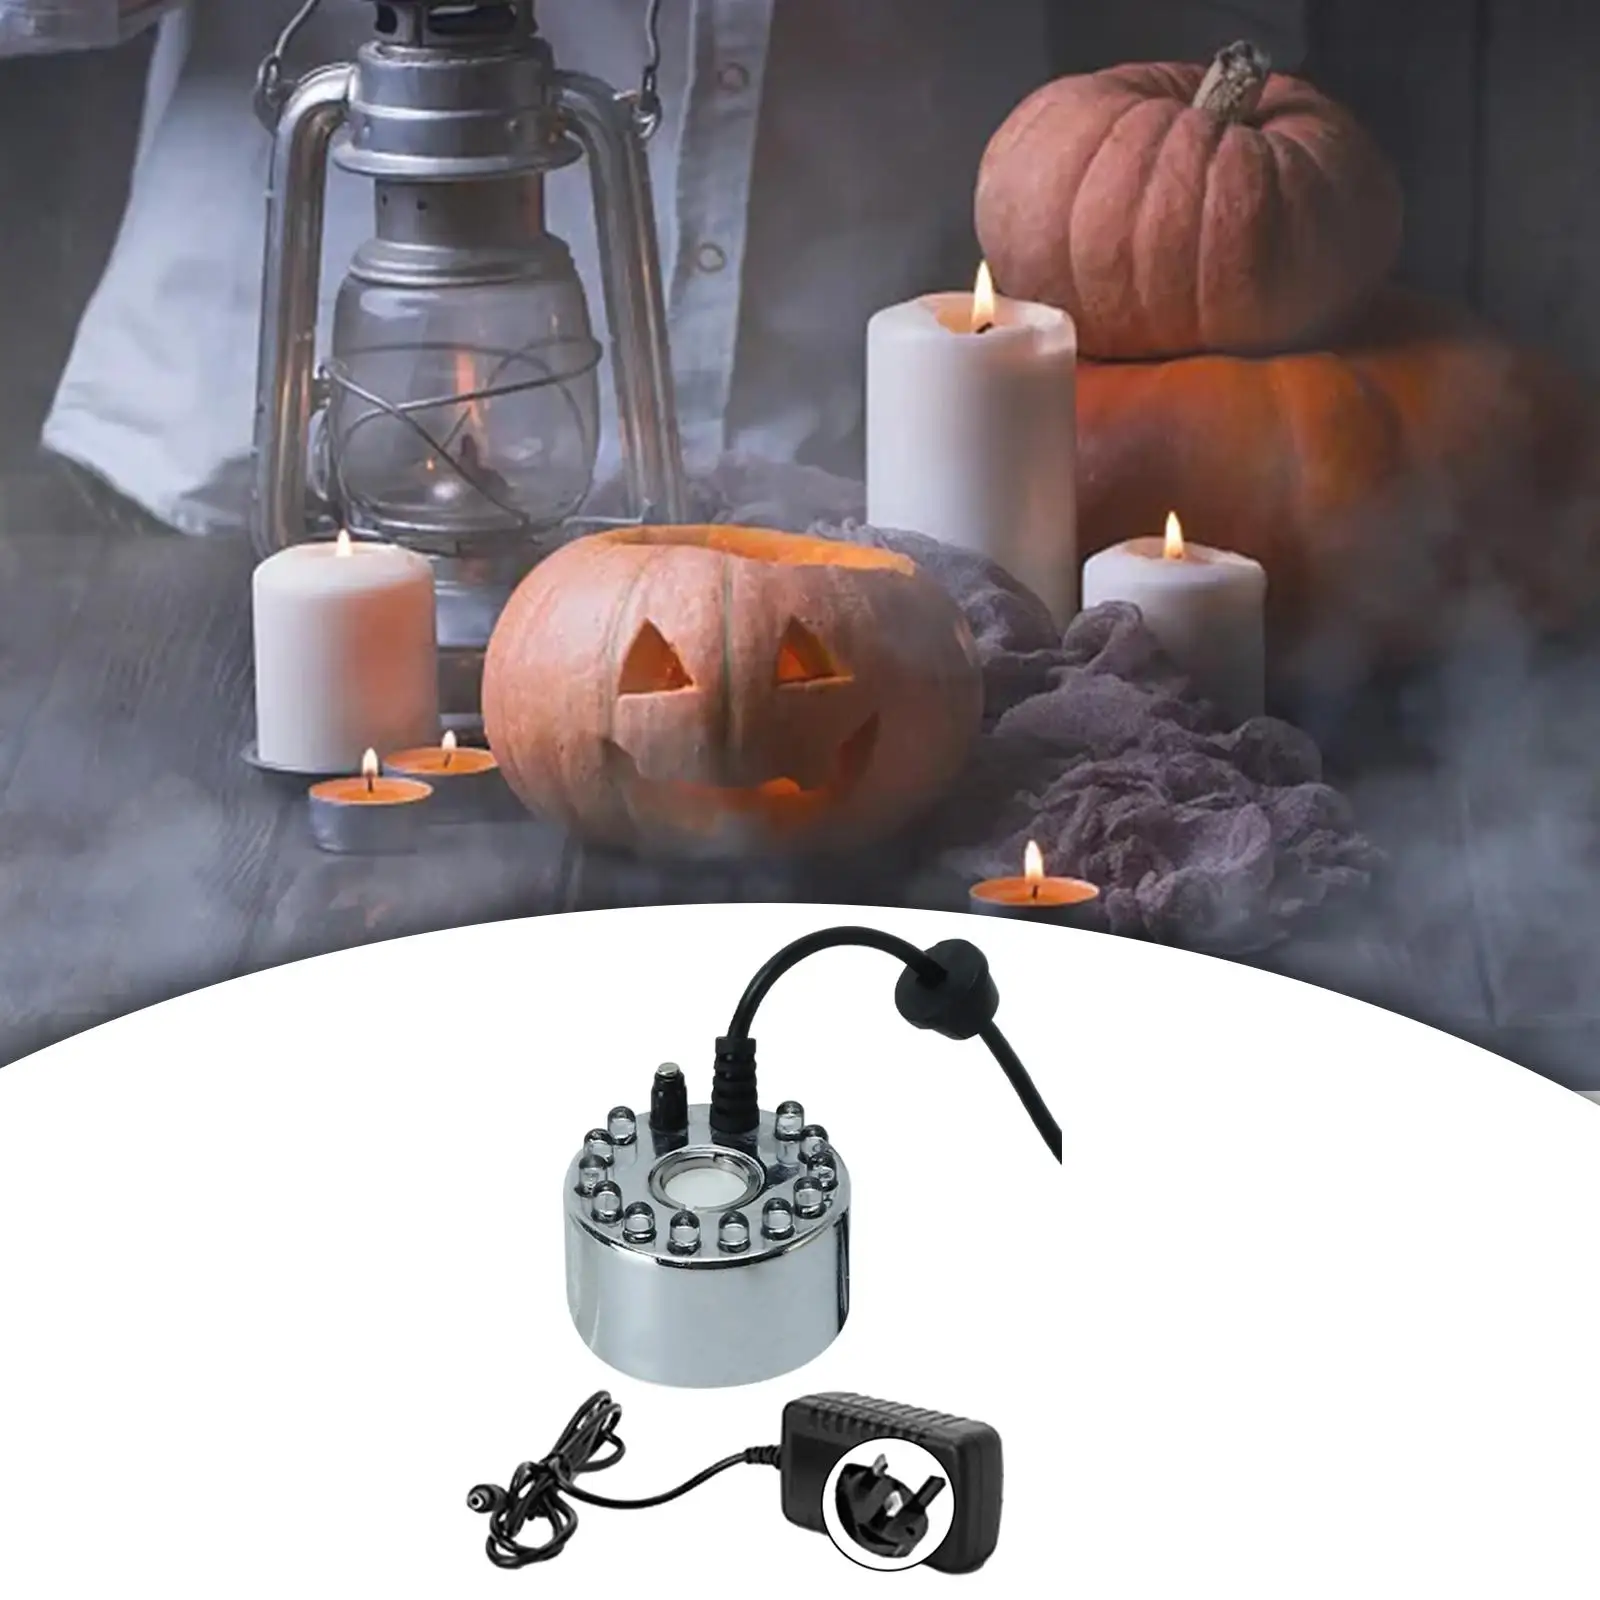 Mini Mist Fogger Mister with Colorful Lights UK Adapter Professional Sturdy Versatile Ultrasonic Mist for Holidays Decoration